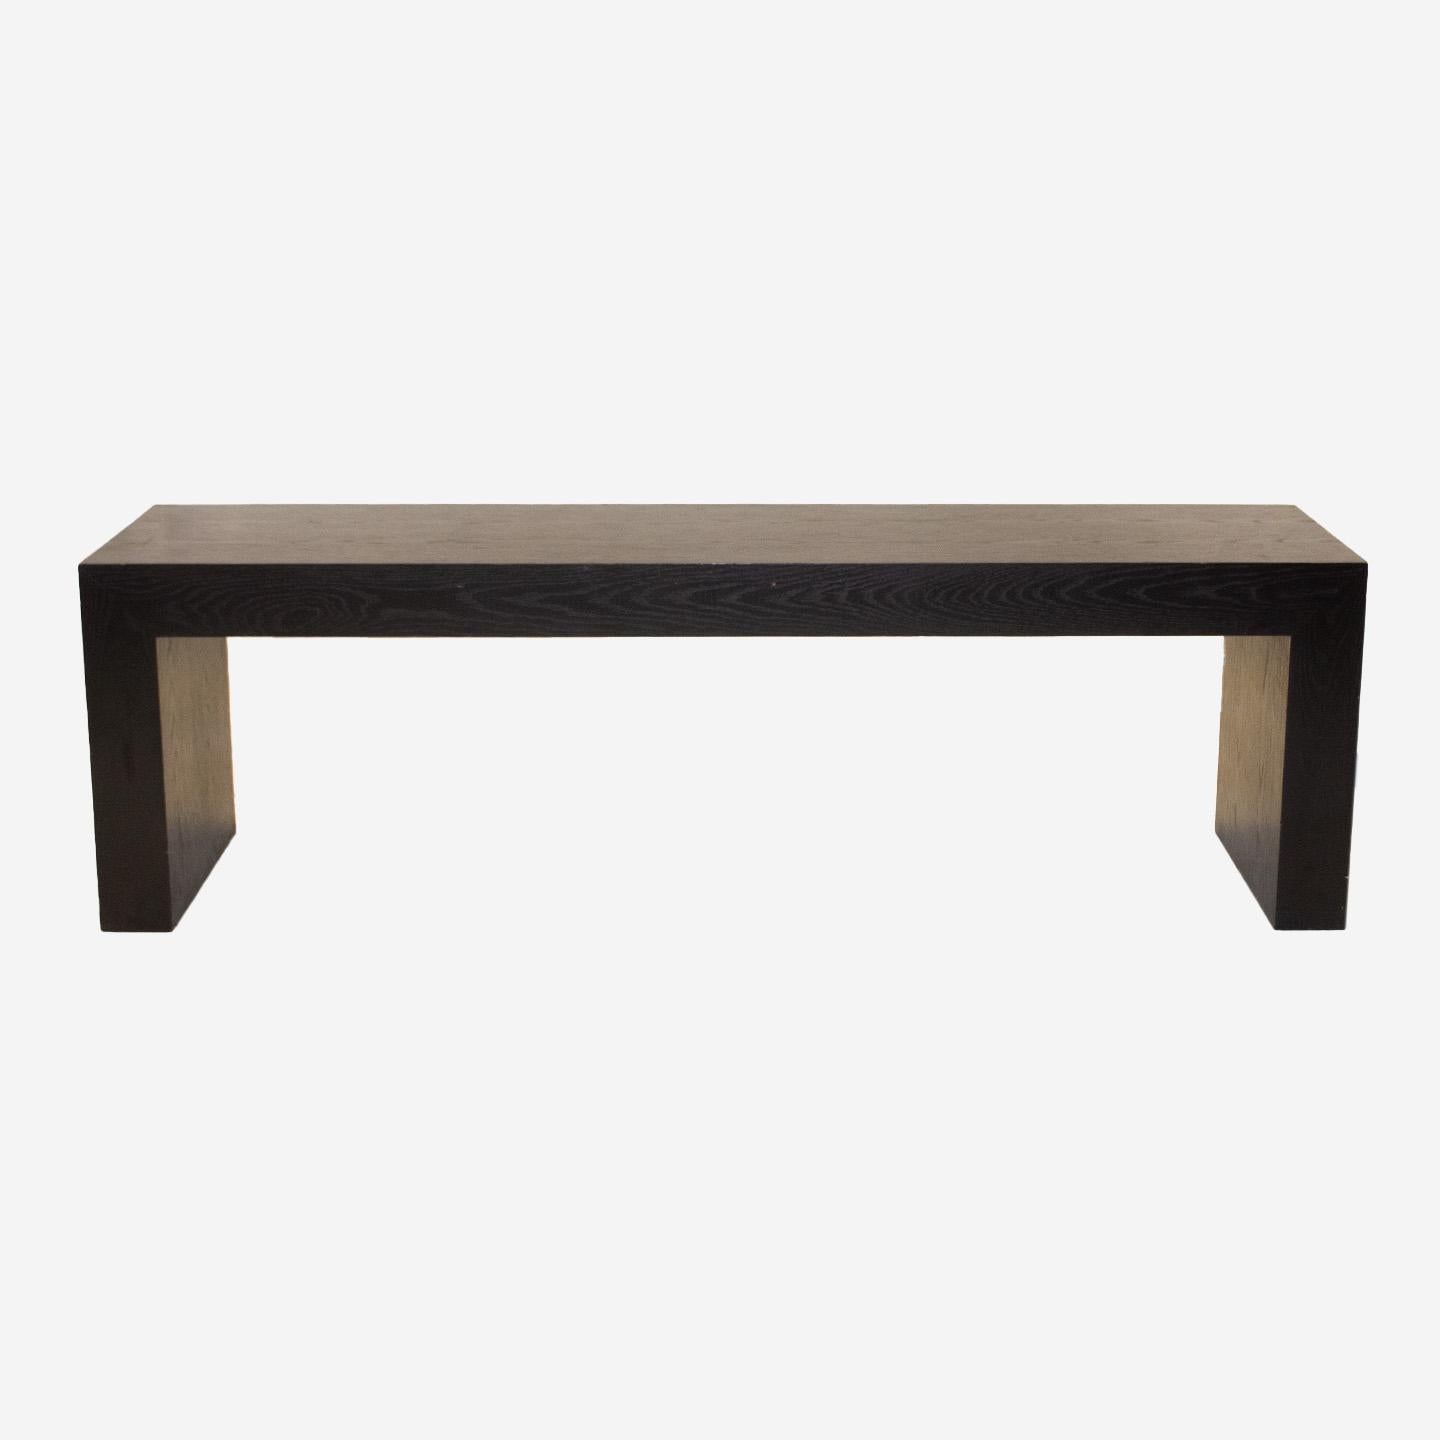 Elegant and boldly modern, this custom made Minimalist walnut bench is made in the USA, c. 1980. With its sleek and sophisticated lines, this piece will also work well as a low console in any room where you need decorative counter surface. The grain